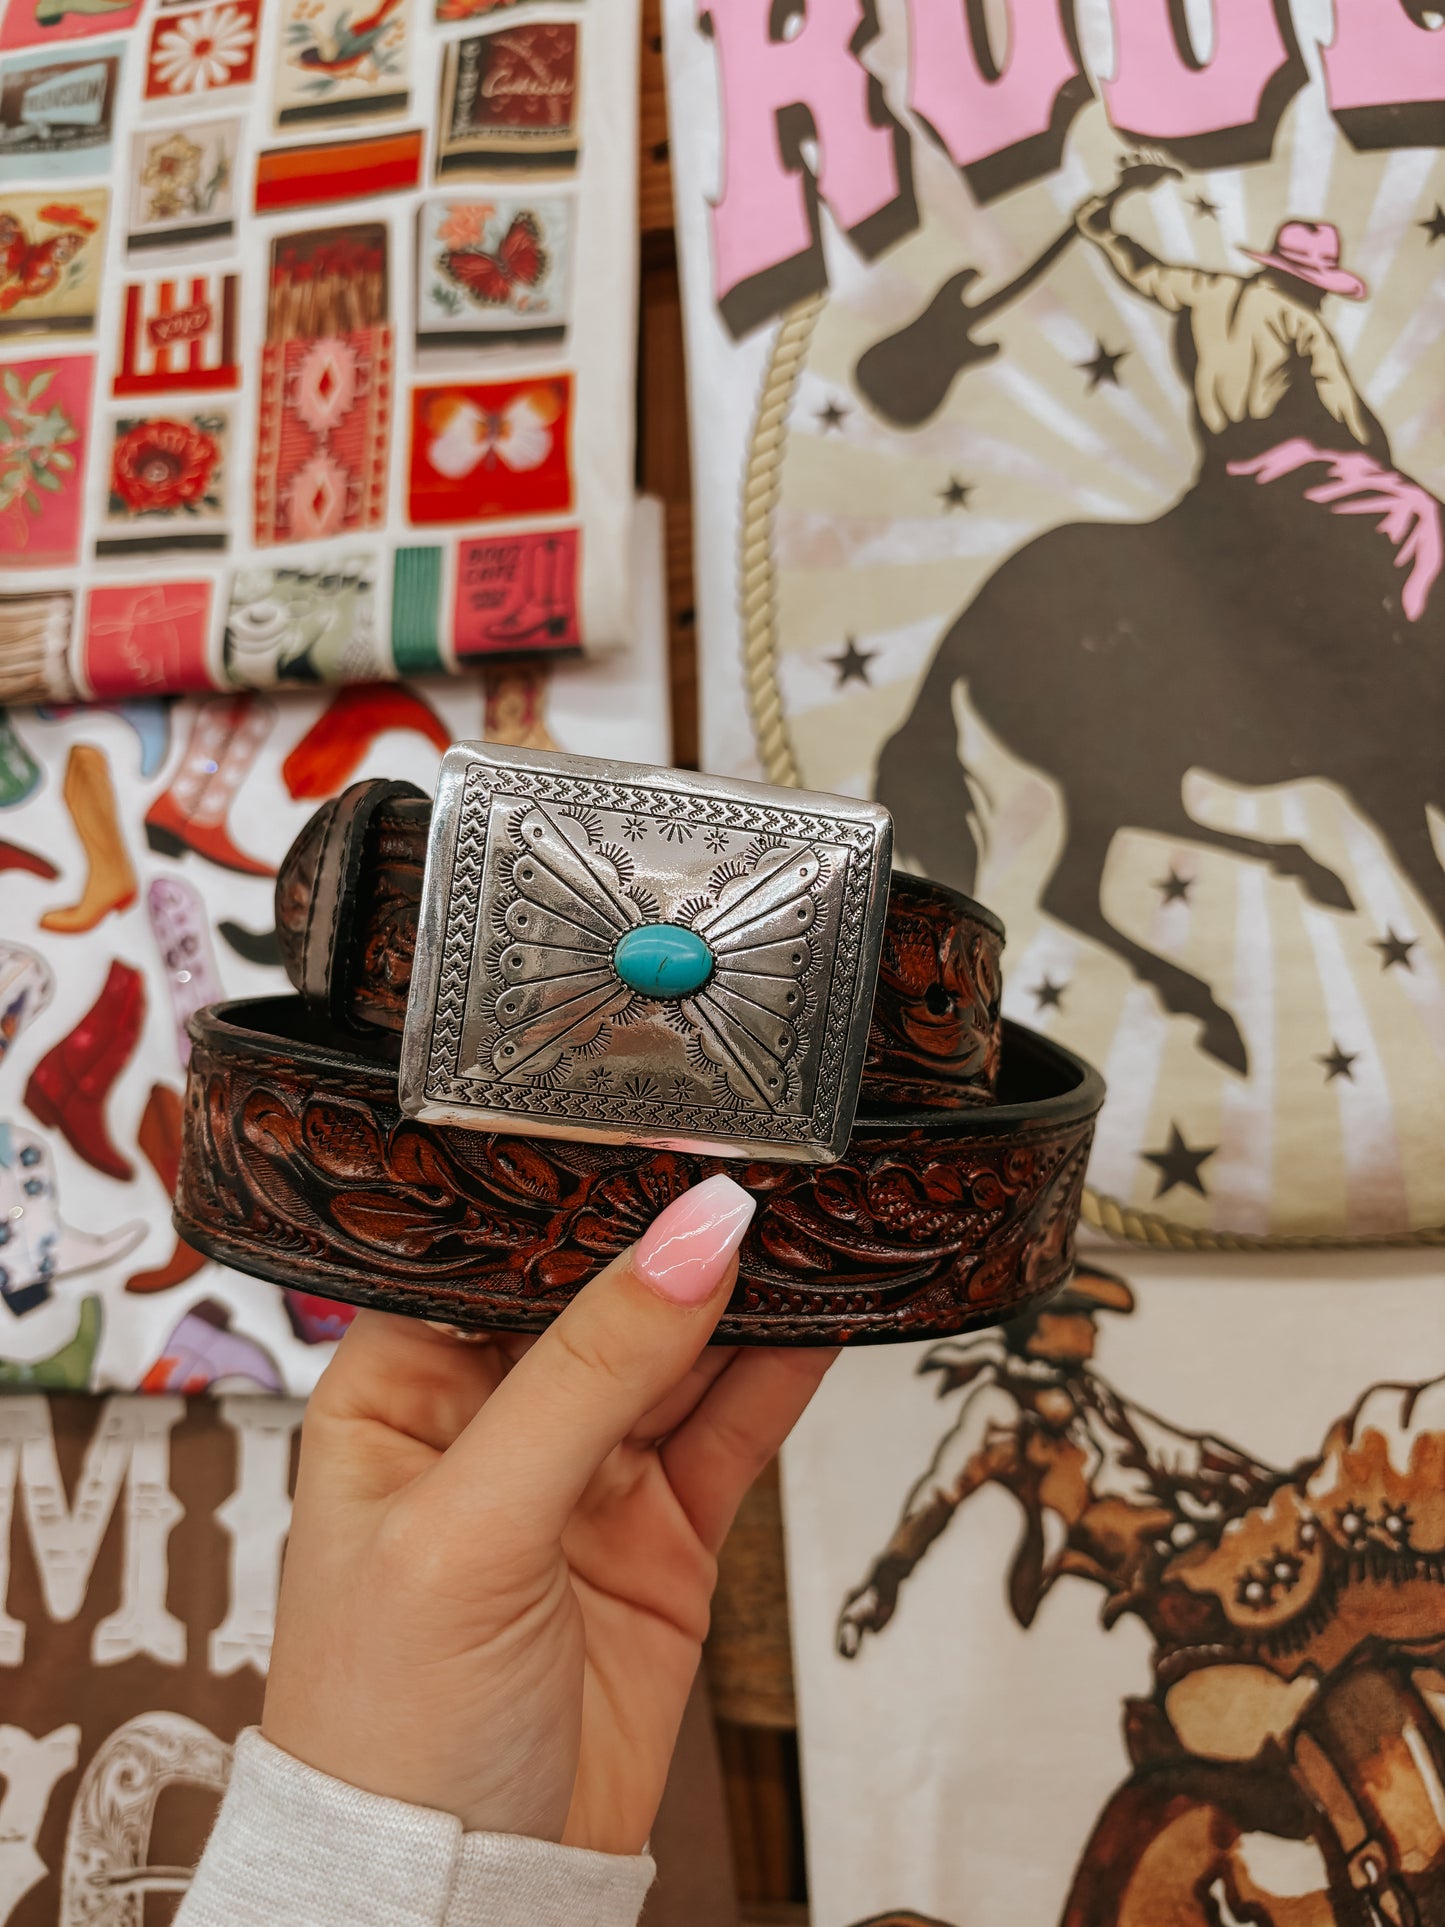 The Turquoise & Silver Rectangular Bowtie Belt Buckle